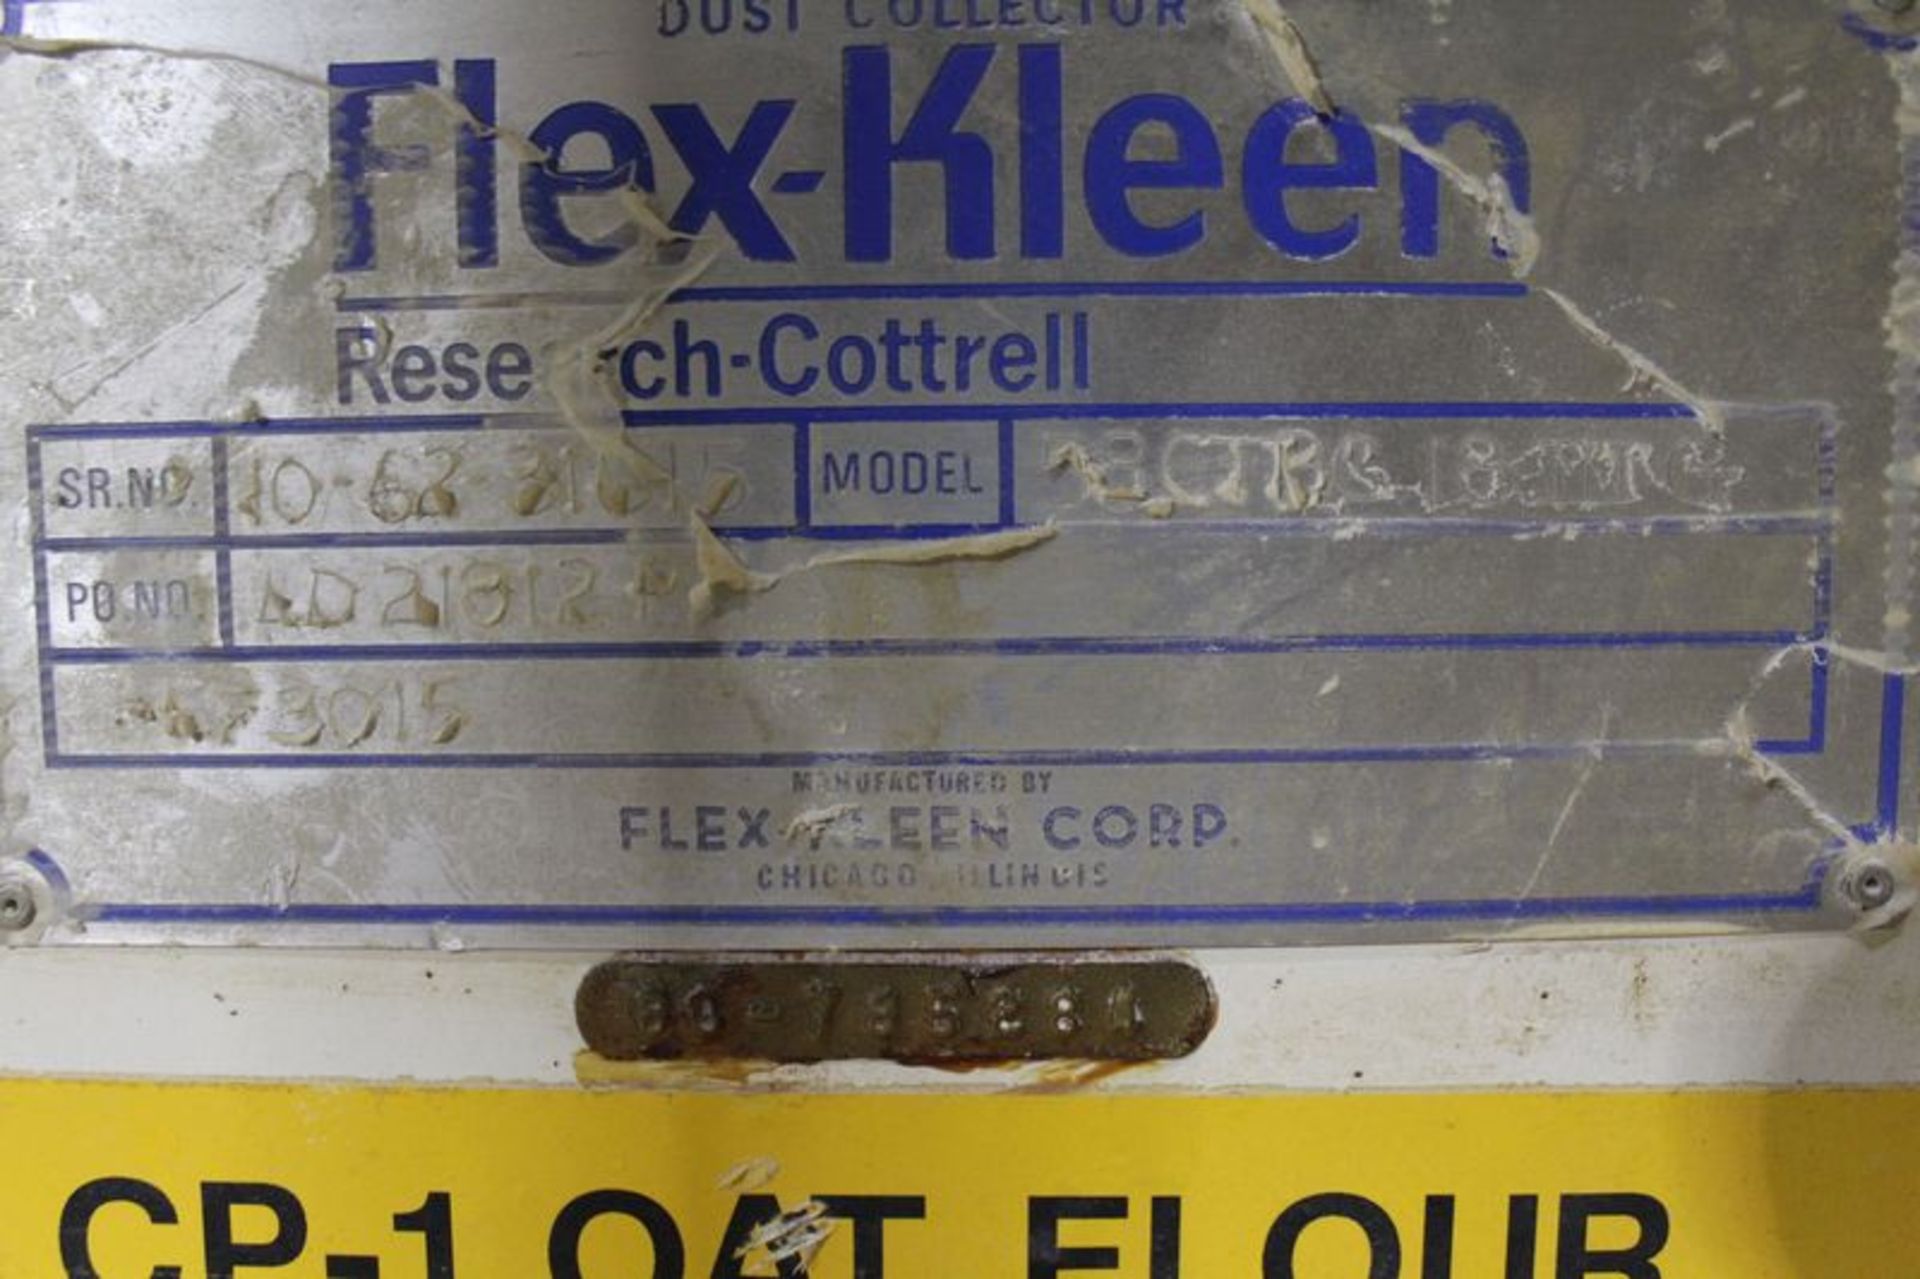 Flex Kleen Dust Collector, W/ Rotary Valve | (CP1 Fourth Floor) - Image 2 of 3